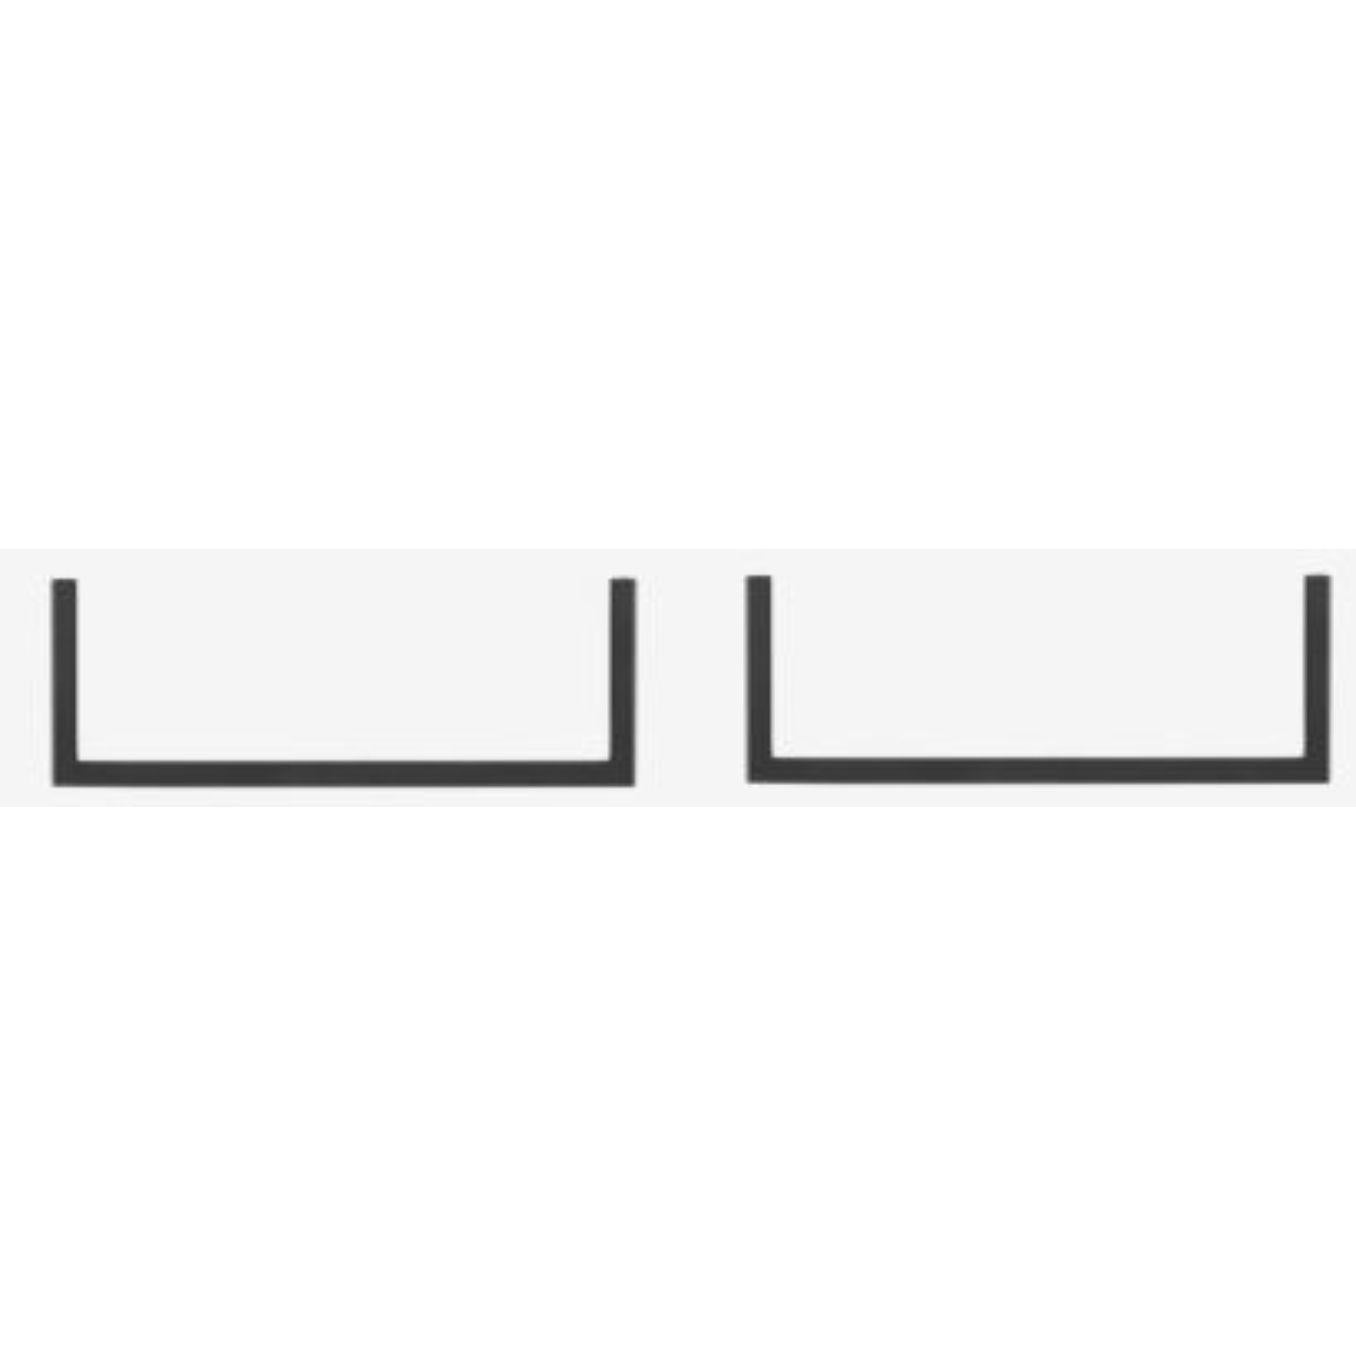 Set of 2 frame 35 rail double by Lassen
Dimensions: D 63 x W 10 x H 12 cm 
Materials: Metal
Also available in different dimensions.
Weight: 1.00 Kg

By Lassen is a Danish design brand focused on iconic designs created by Mogens and Flemming